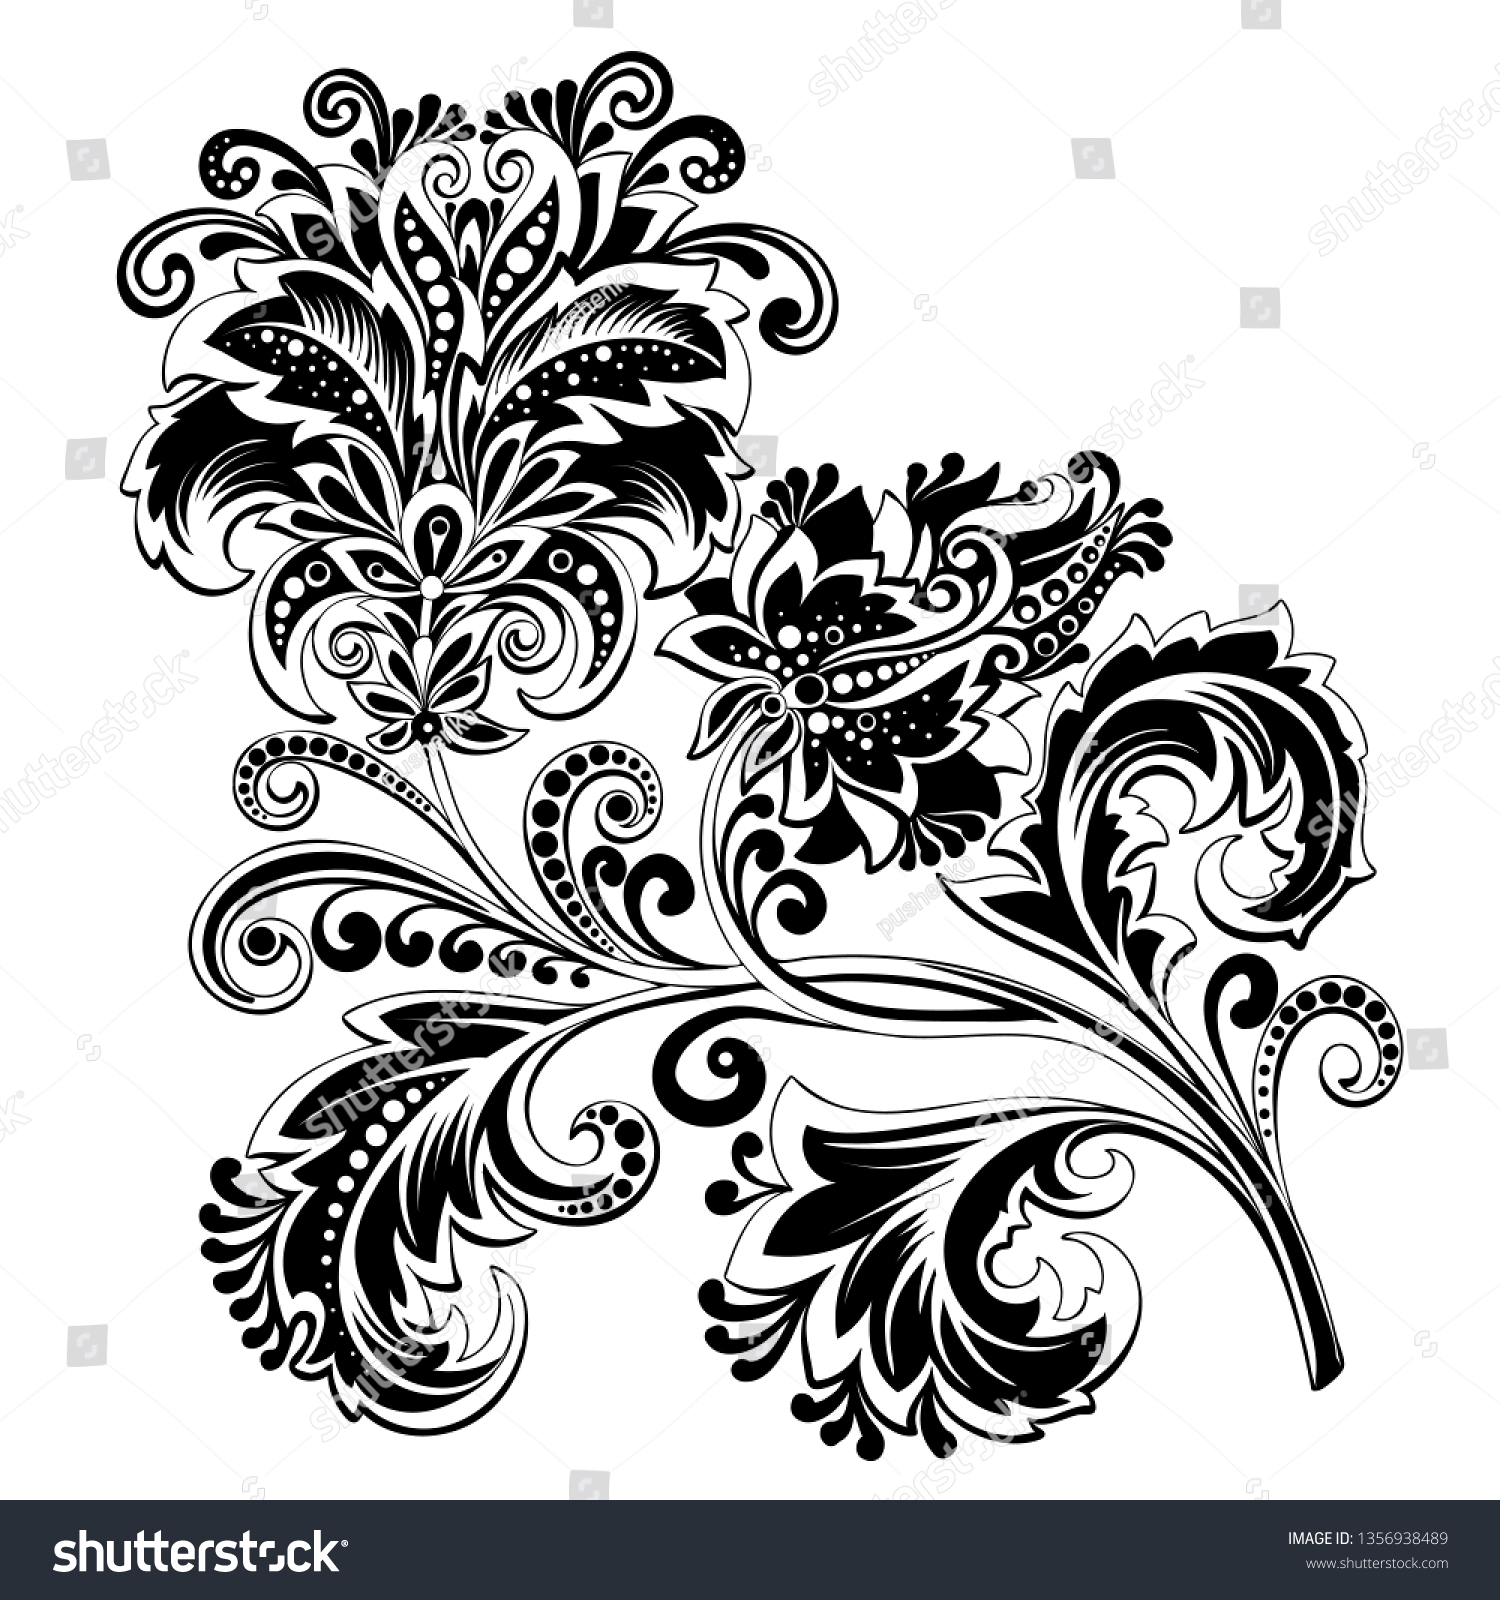 Vector Black White Floral Clipart Tattoo Stock Vector (Royalty Free ...